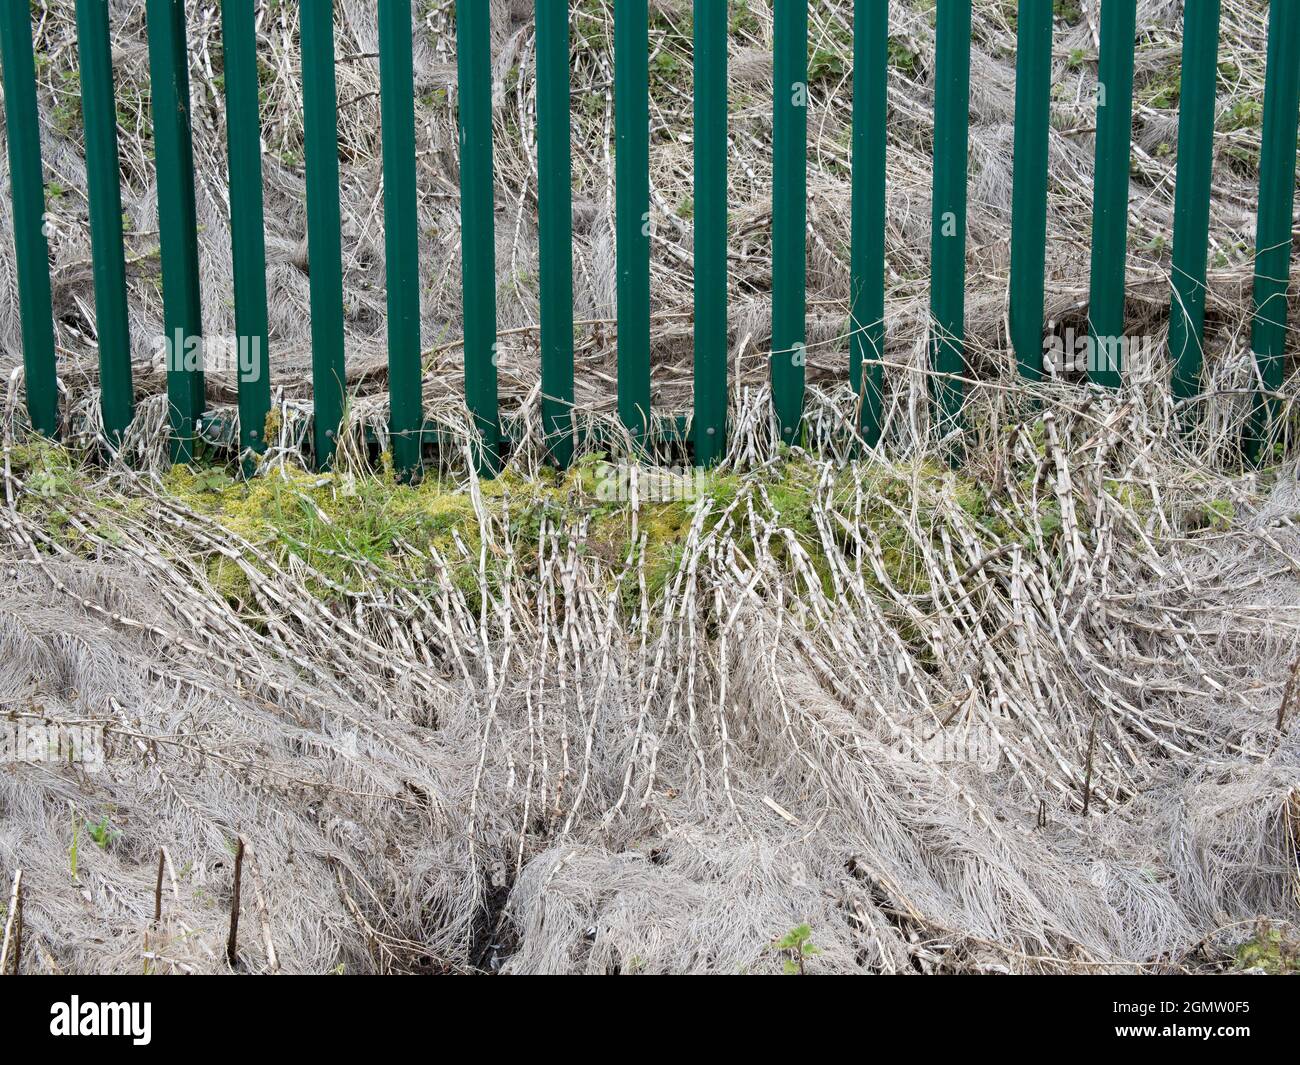 You can see patterns and abstraction everywhere. These swirling, abstract patterns and dividing fence were seen in a walk by dry undergrowth in Kennin Stock Photo